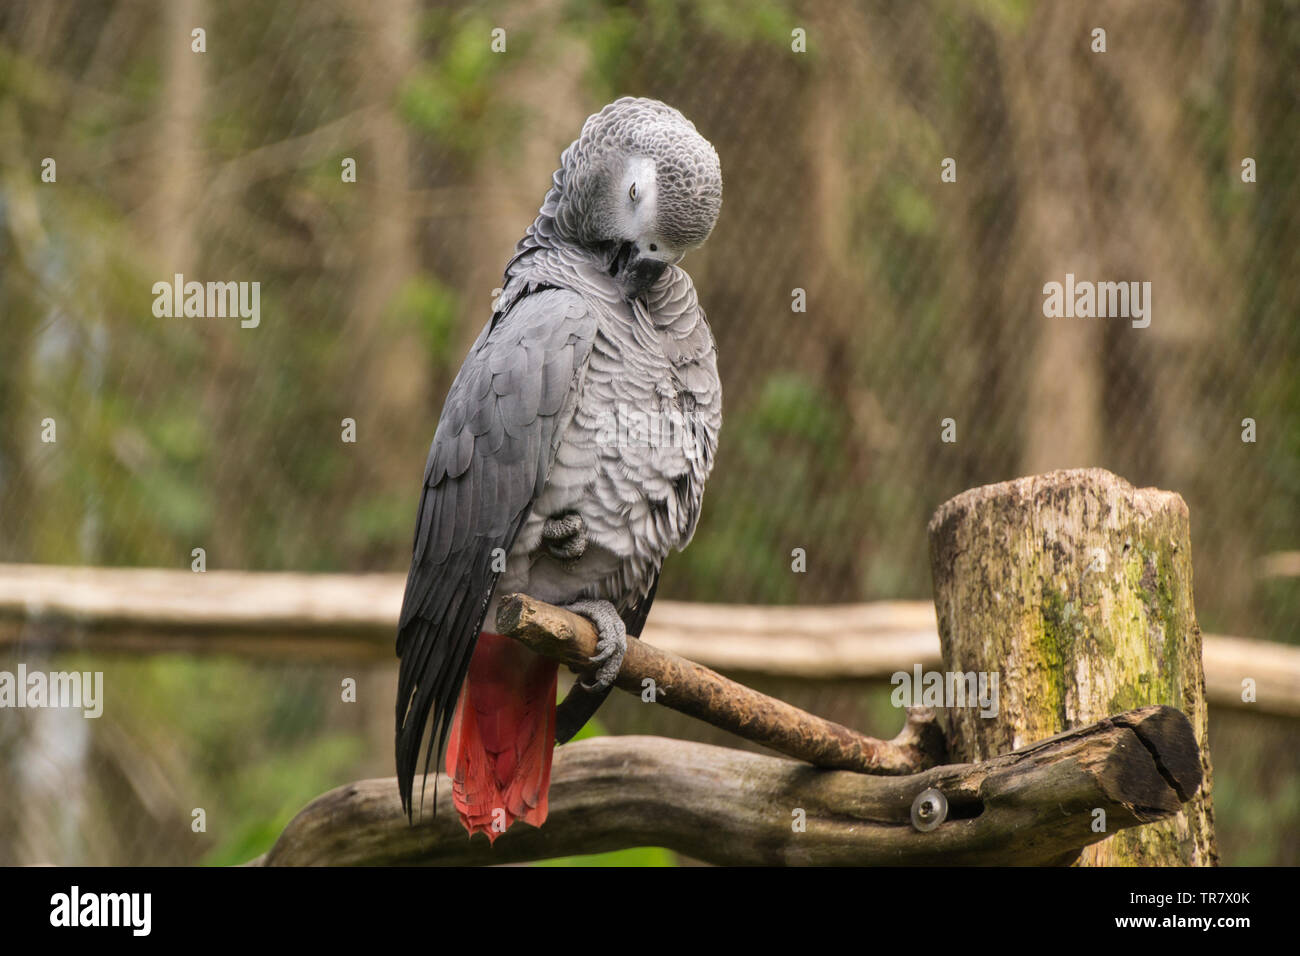 Psittacus is a genus of African parrots in the subfamily Psittacinae. He was photographed at the zoo in Guadeloupe. Stock Photo